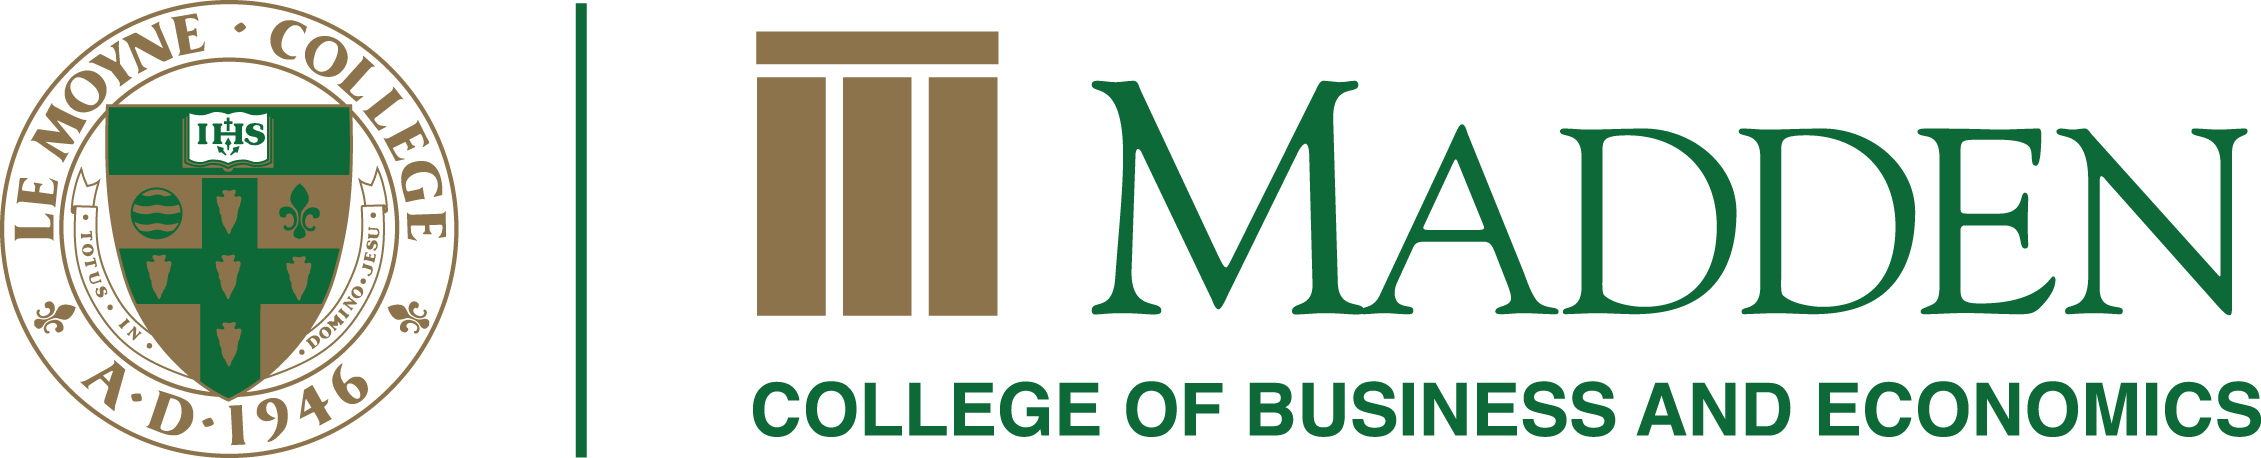 The Madden School of Business at Le Moyne College in Syracuse, New York